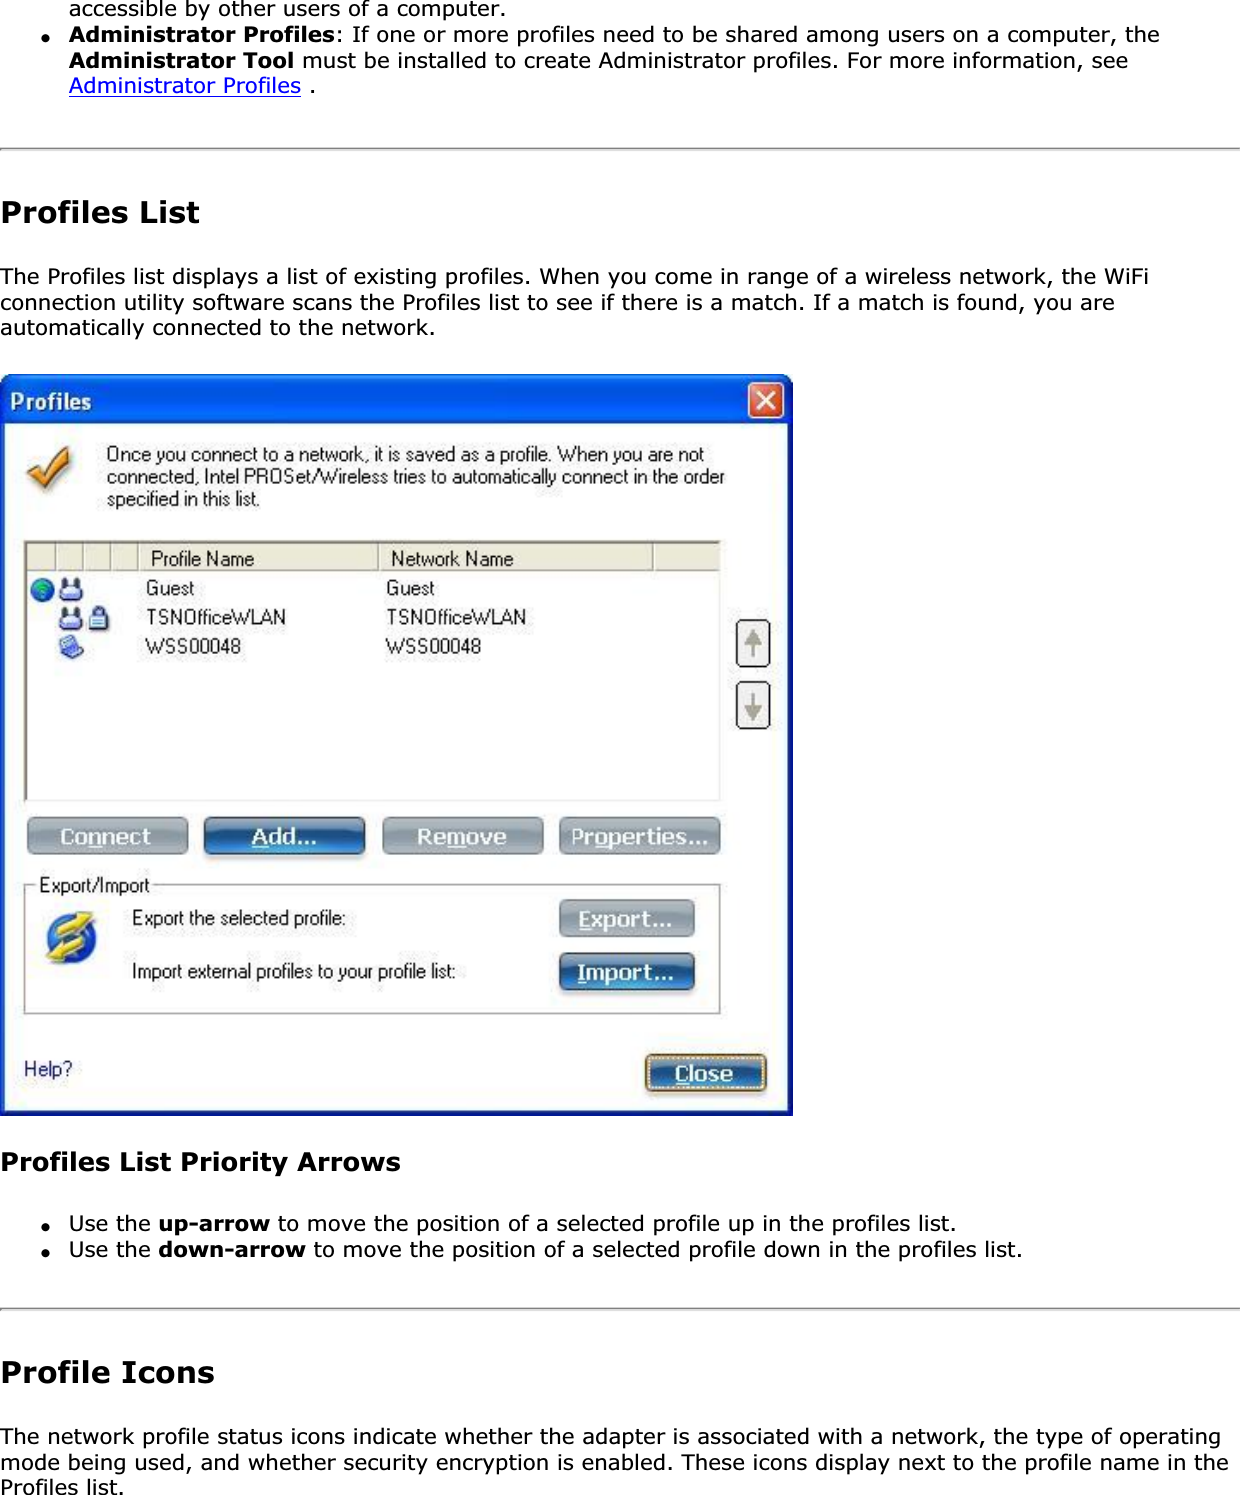 accessible by other users of a computer.●Administrator Profiles: If one or more profiles need to be shared among users on a computer, the Administrator Tool must be installed to create Administrator profiles. For more information, see Administrator Profiles .Profiles ListThe Profiles list displays a list of existing profiles. When you come in range of a wireless network, the WiFi connection utility software scans the Profiles list to see if there is a match. If a match is found, you are automatically connected to the network.Profiles List Priority Arrows●Use the up-arrow to move the position of a selected profile up in the profiles list.●Use the down-arrow to move the position of a selected profile down in the profiles list.Profile IconsThe network profile status icons indicate whether the adapter is associated with a network, the type of operating mode being used, and whether security encryption is enabled. These icons display next to the profile name in the Profiles list.